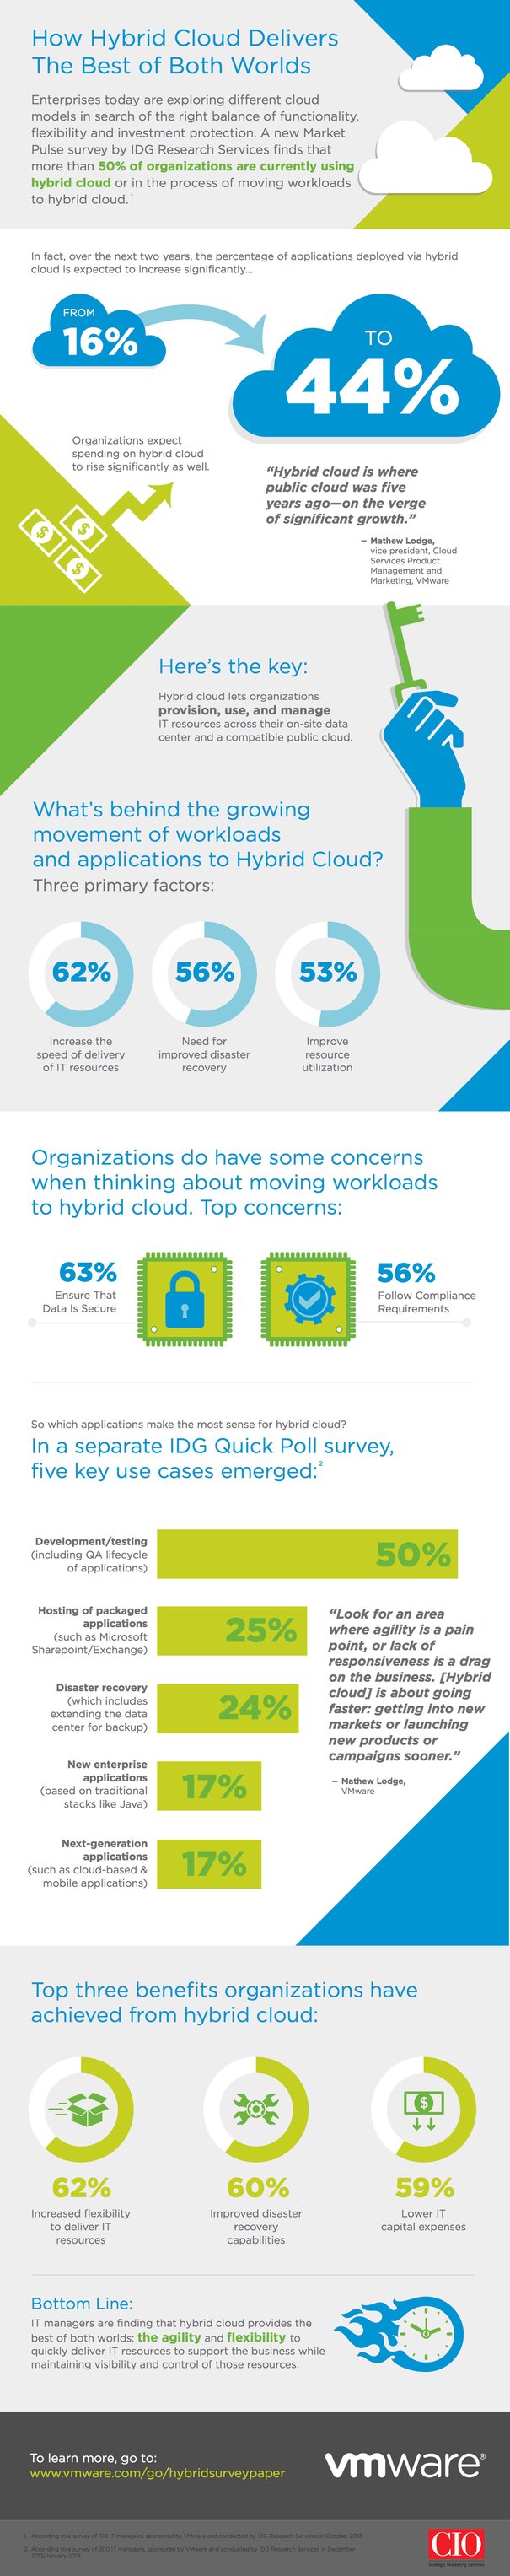 VMware Infographic-Hybrid Cloud Delivers Best of Both Worlds.jpg